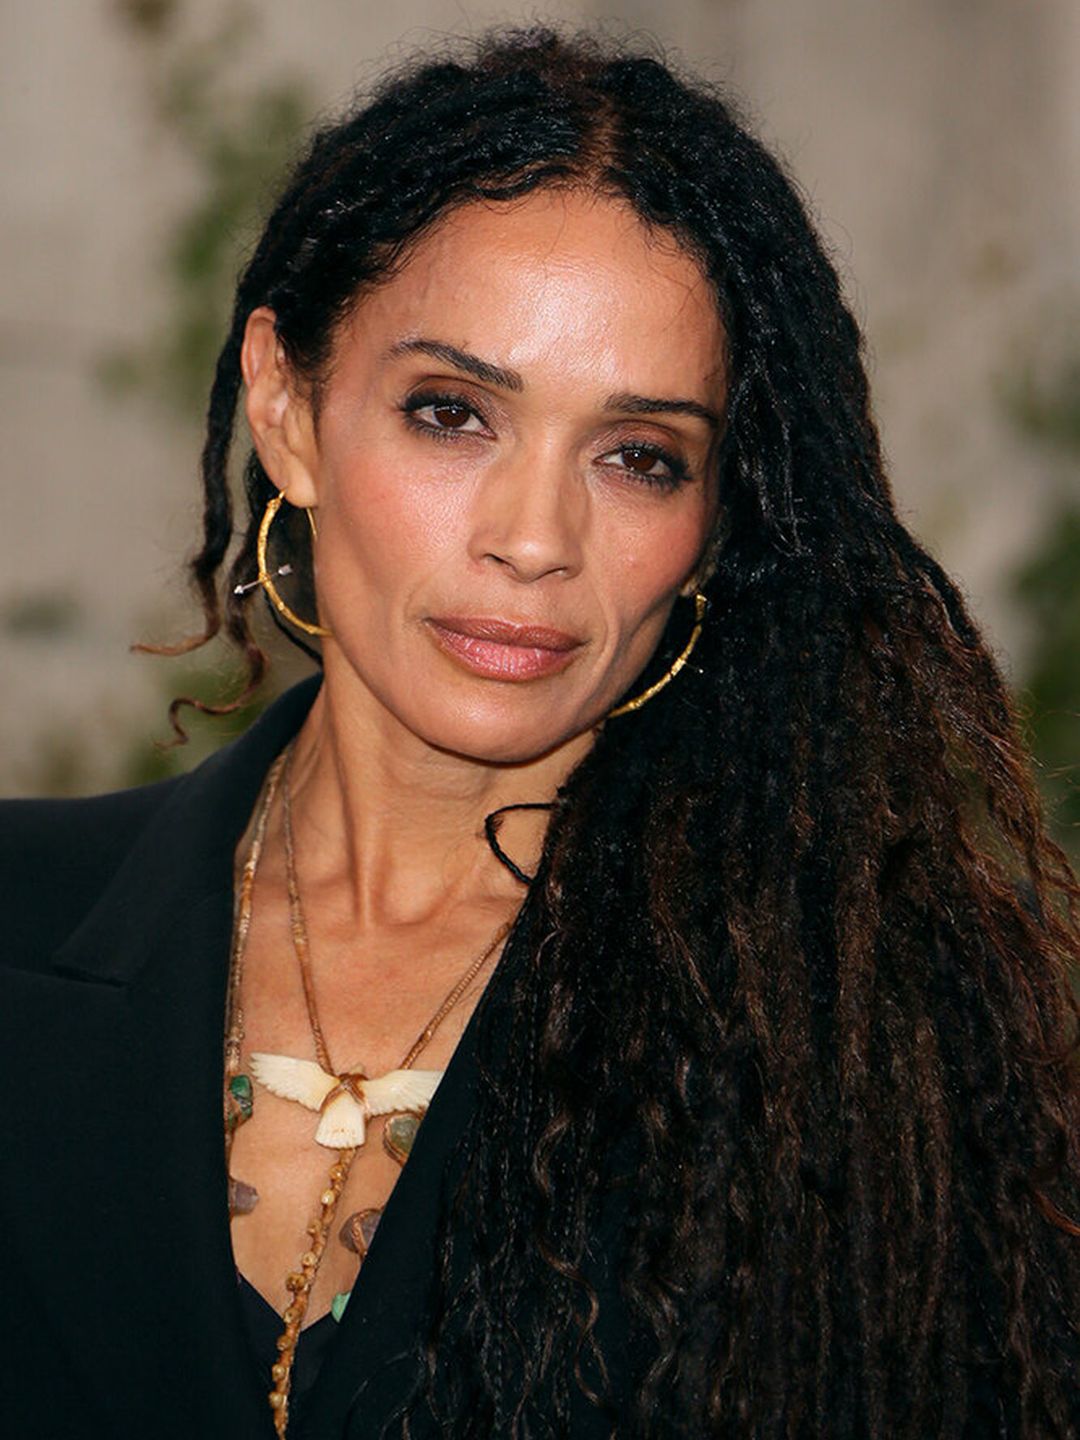 Lisa Bonet who are her parents